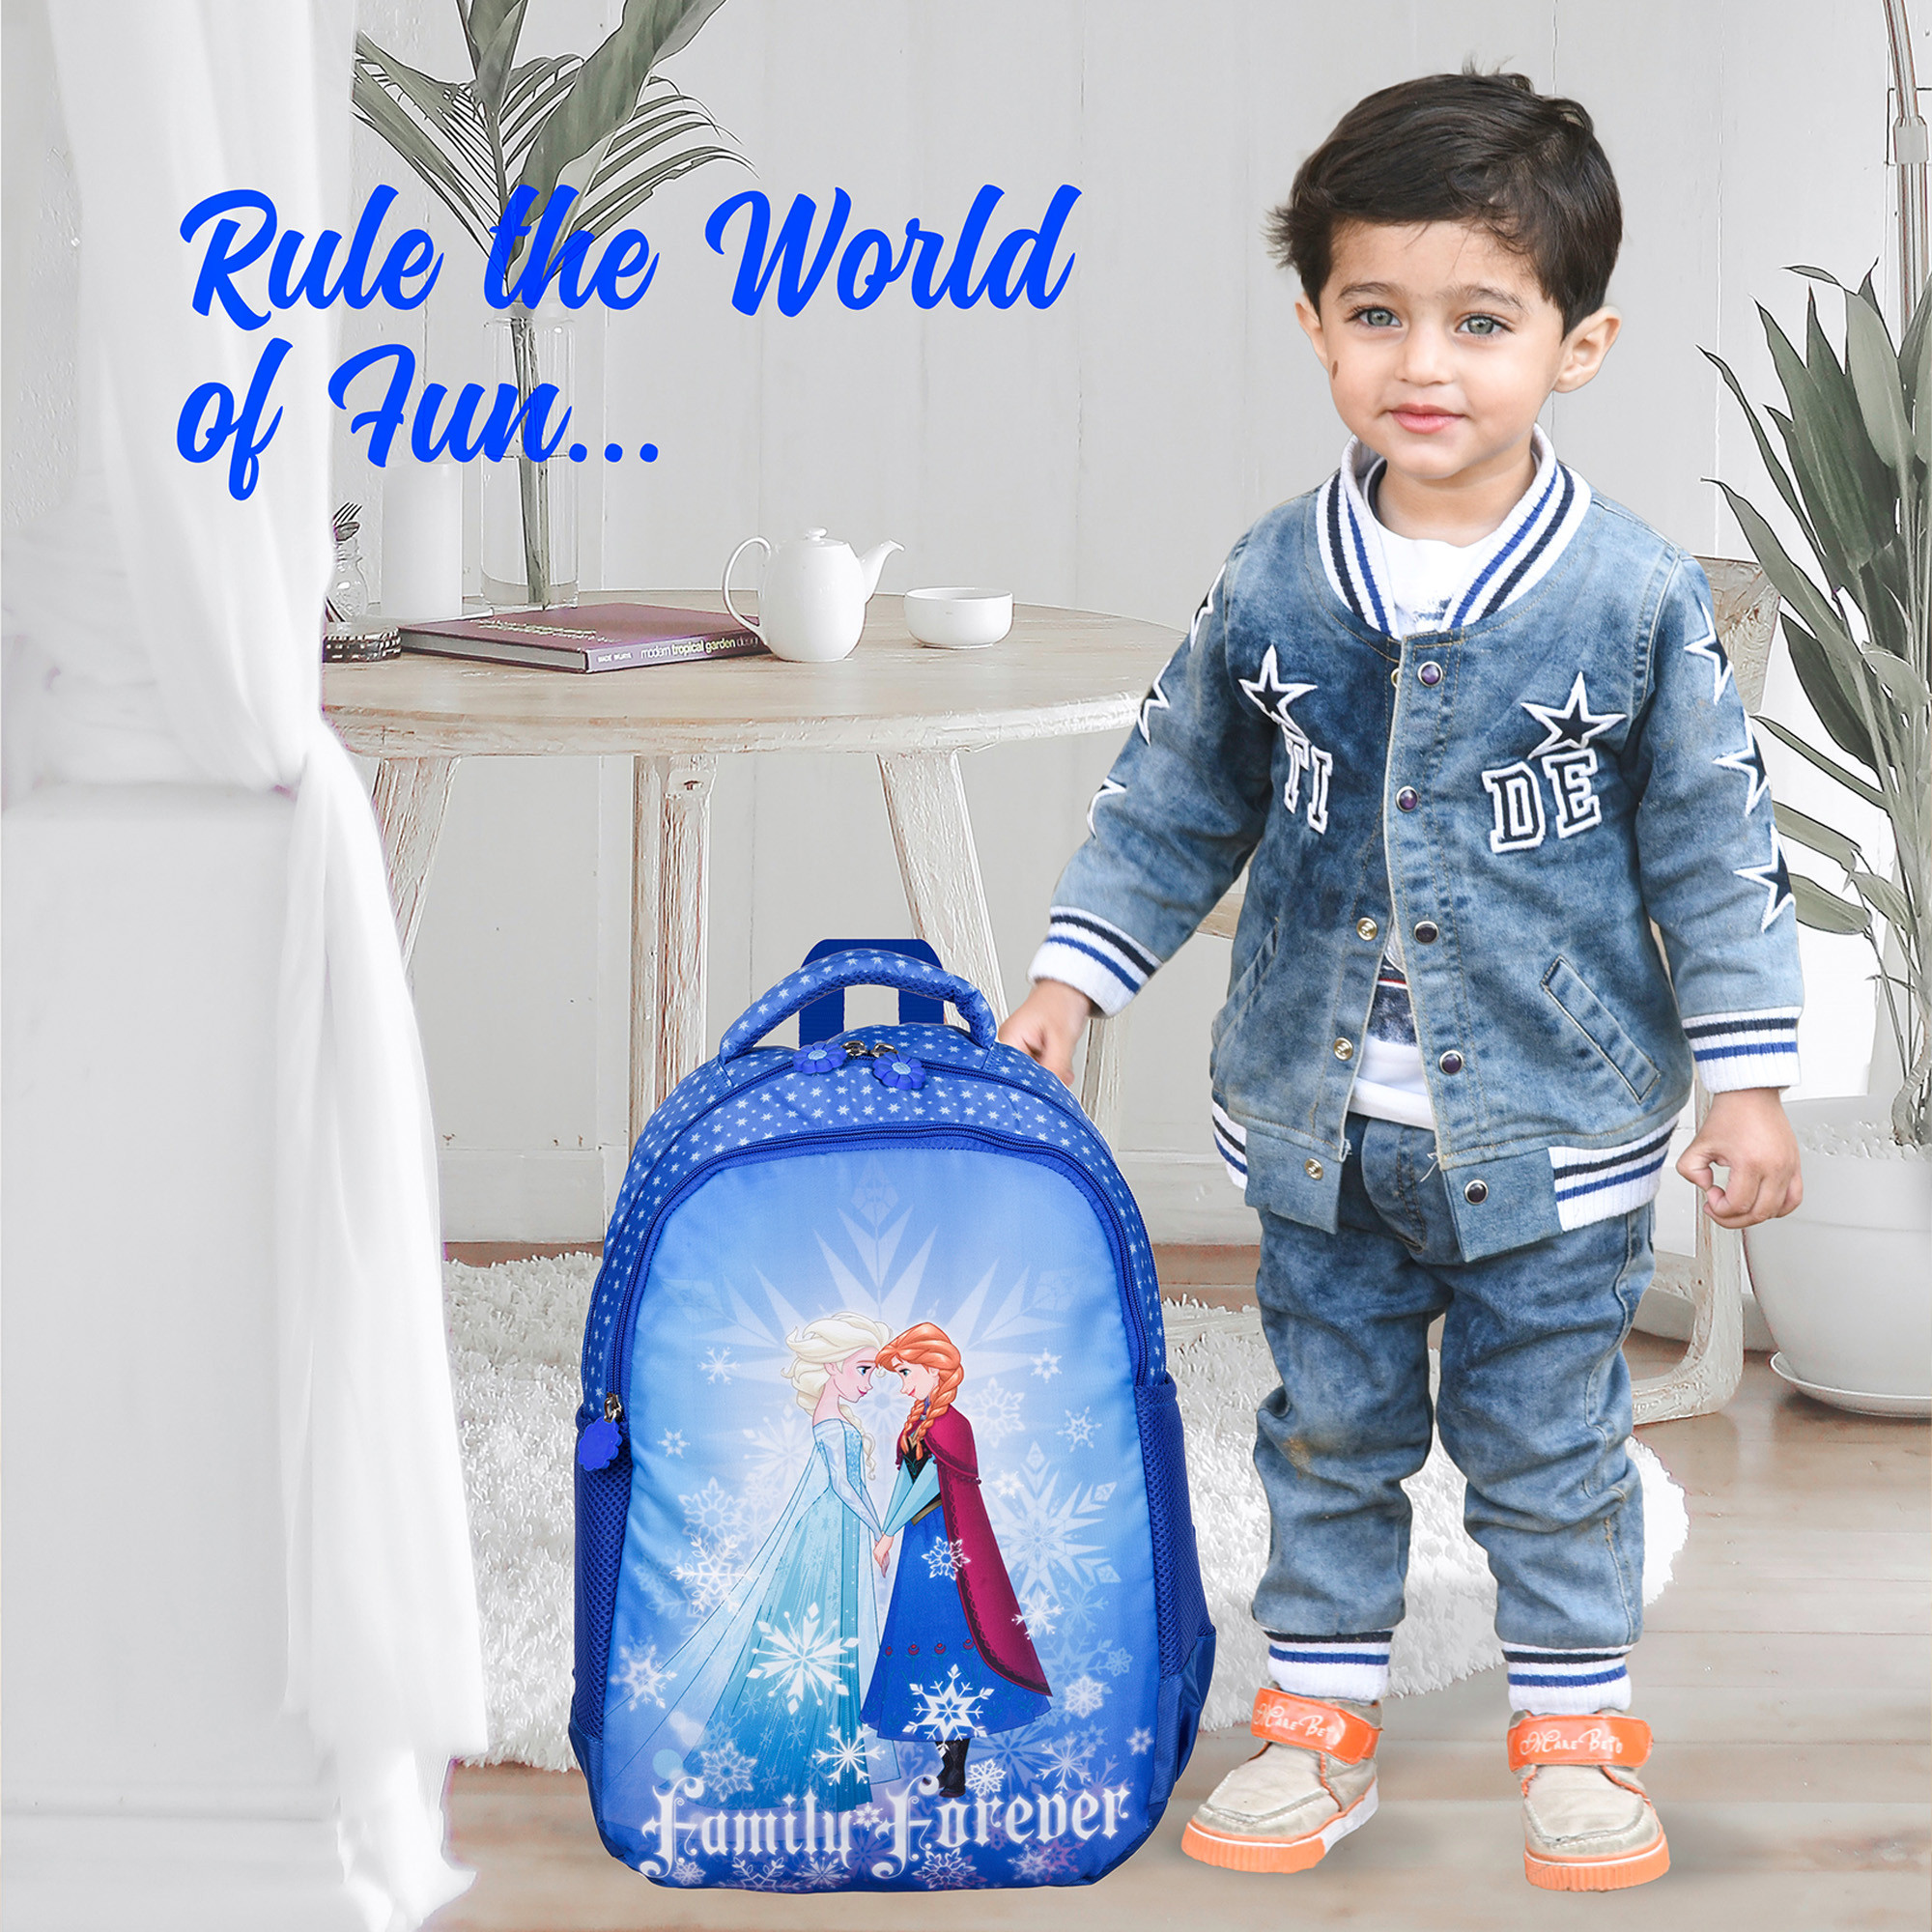 Kuber Industries Disney Frozen Family Forever Backpack | School Backpack for Kids | College Backpack | School Bag for Boys & Girls | 3 Compartments School Bag | Spacious & Multiple Pockets | Blue